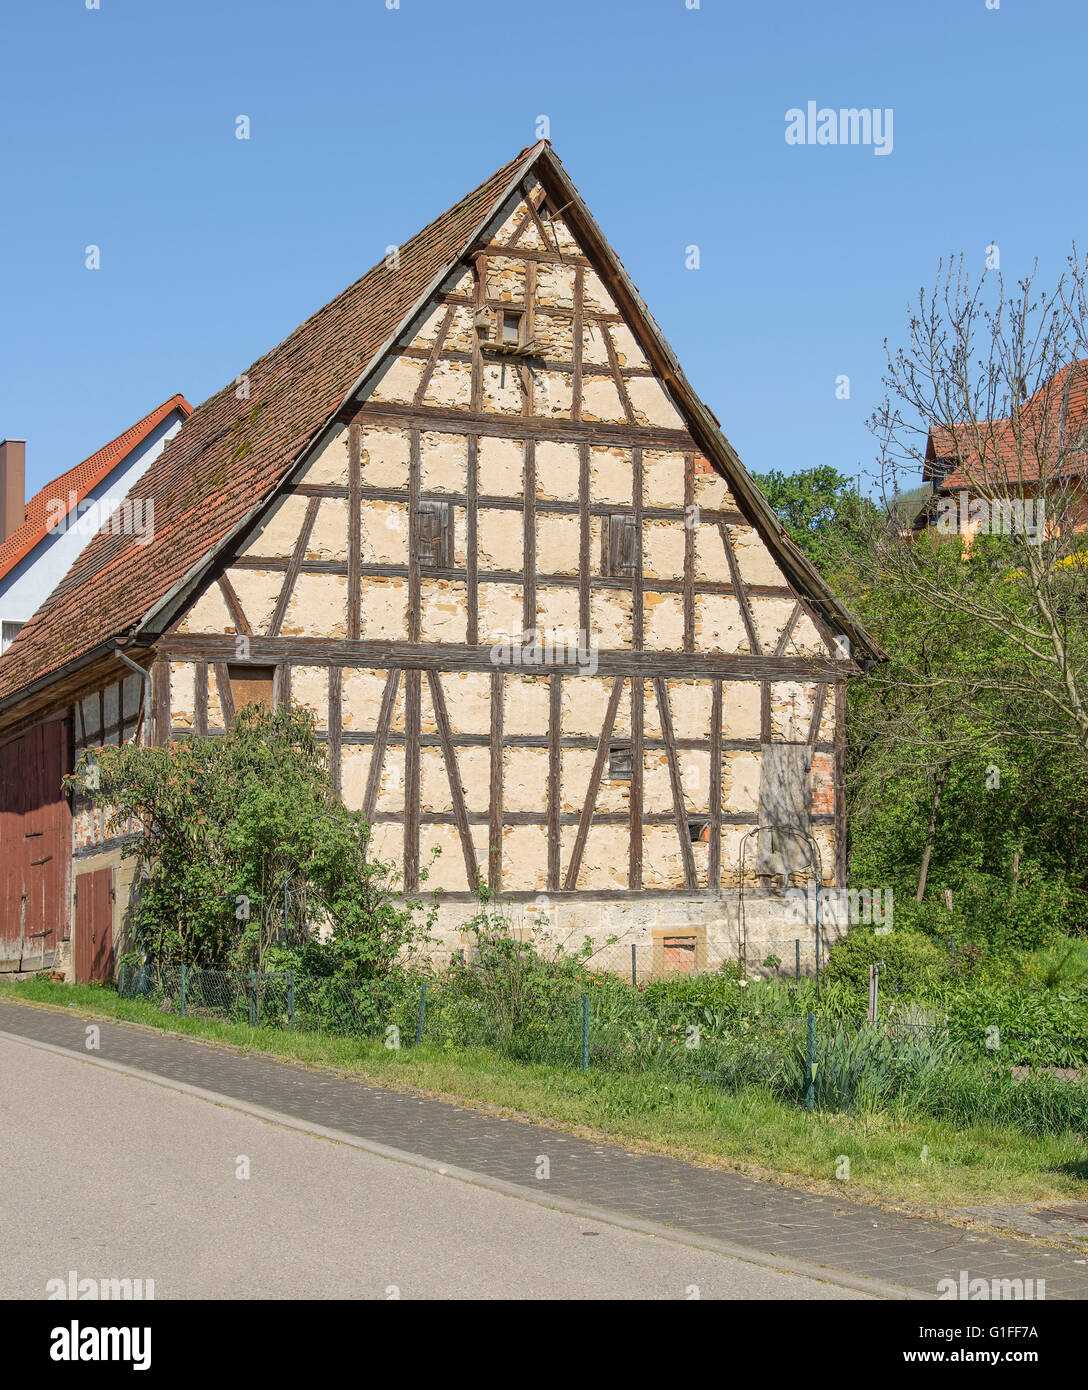 idyllic scenery around a village in Hohenlohe named Baechlingen at spring time Stock Photo